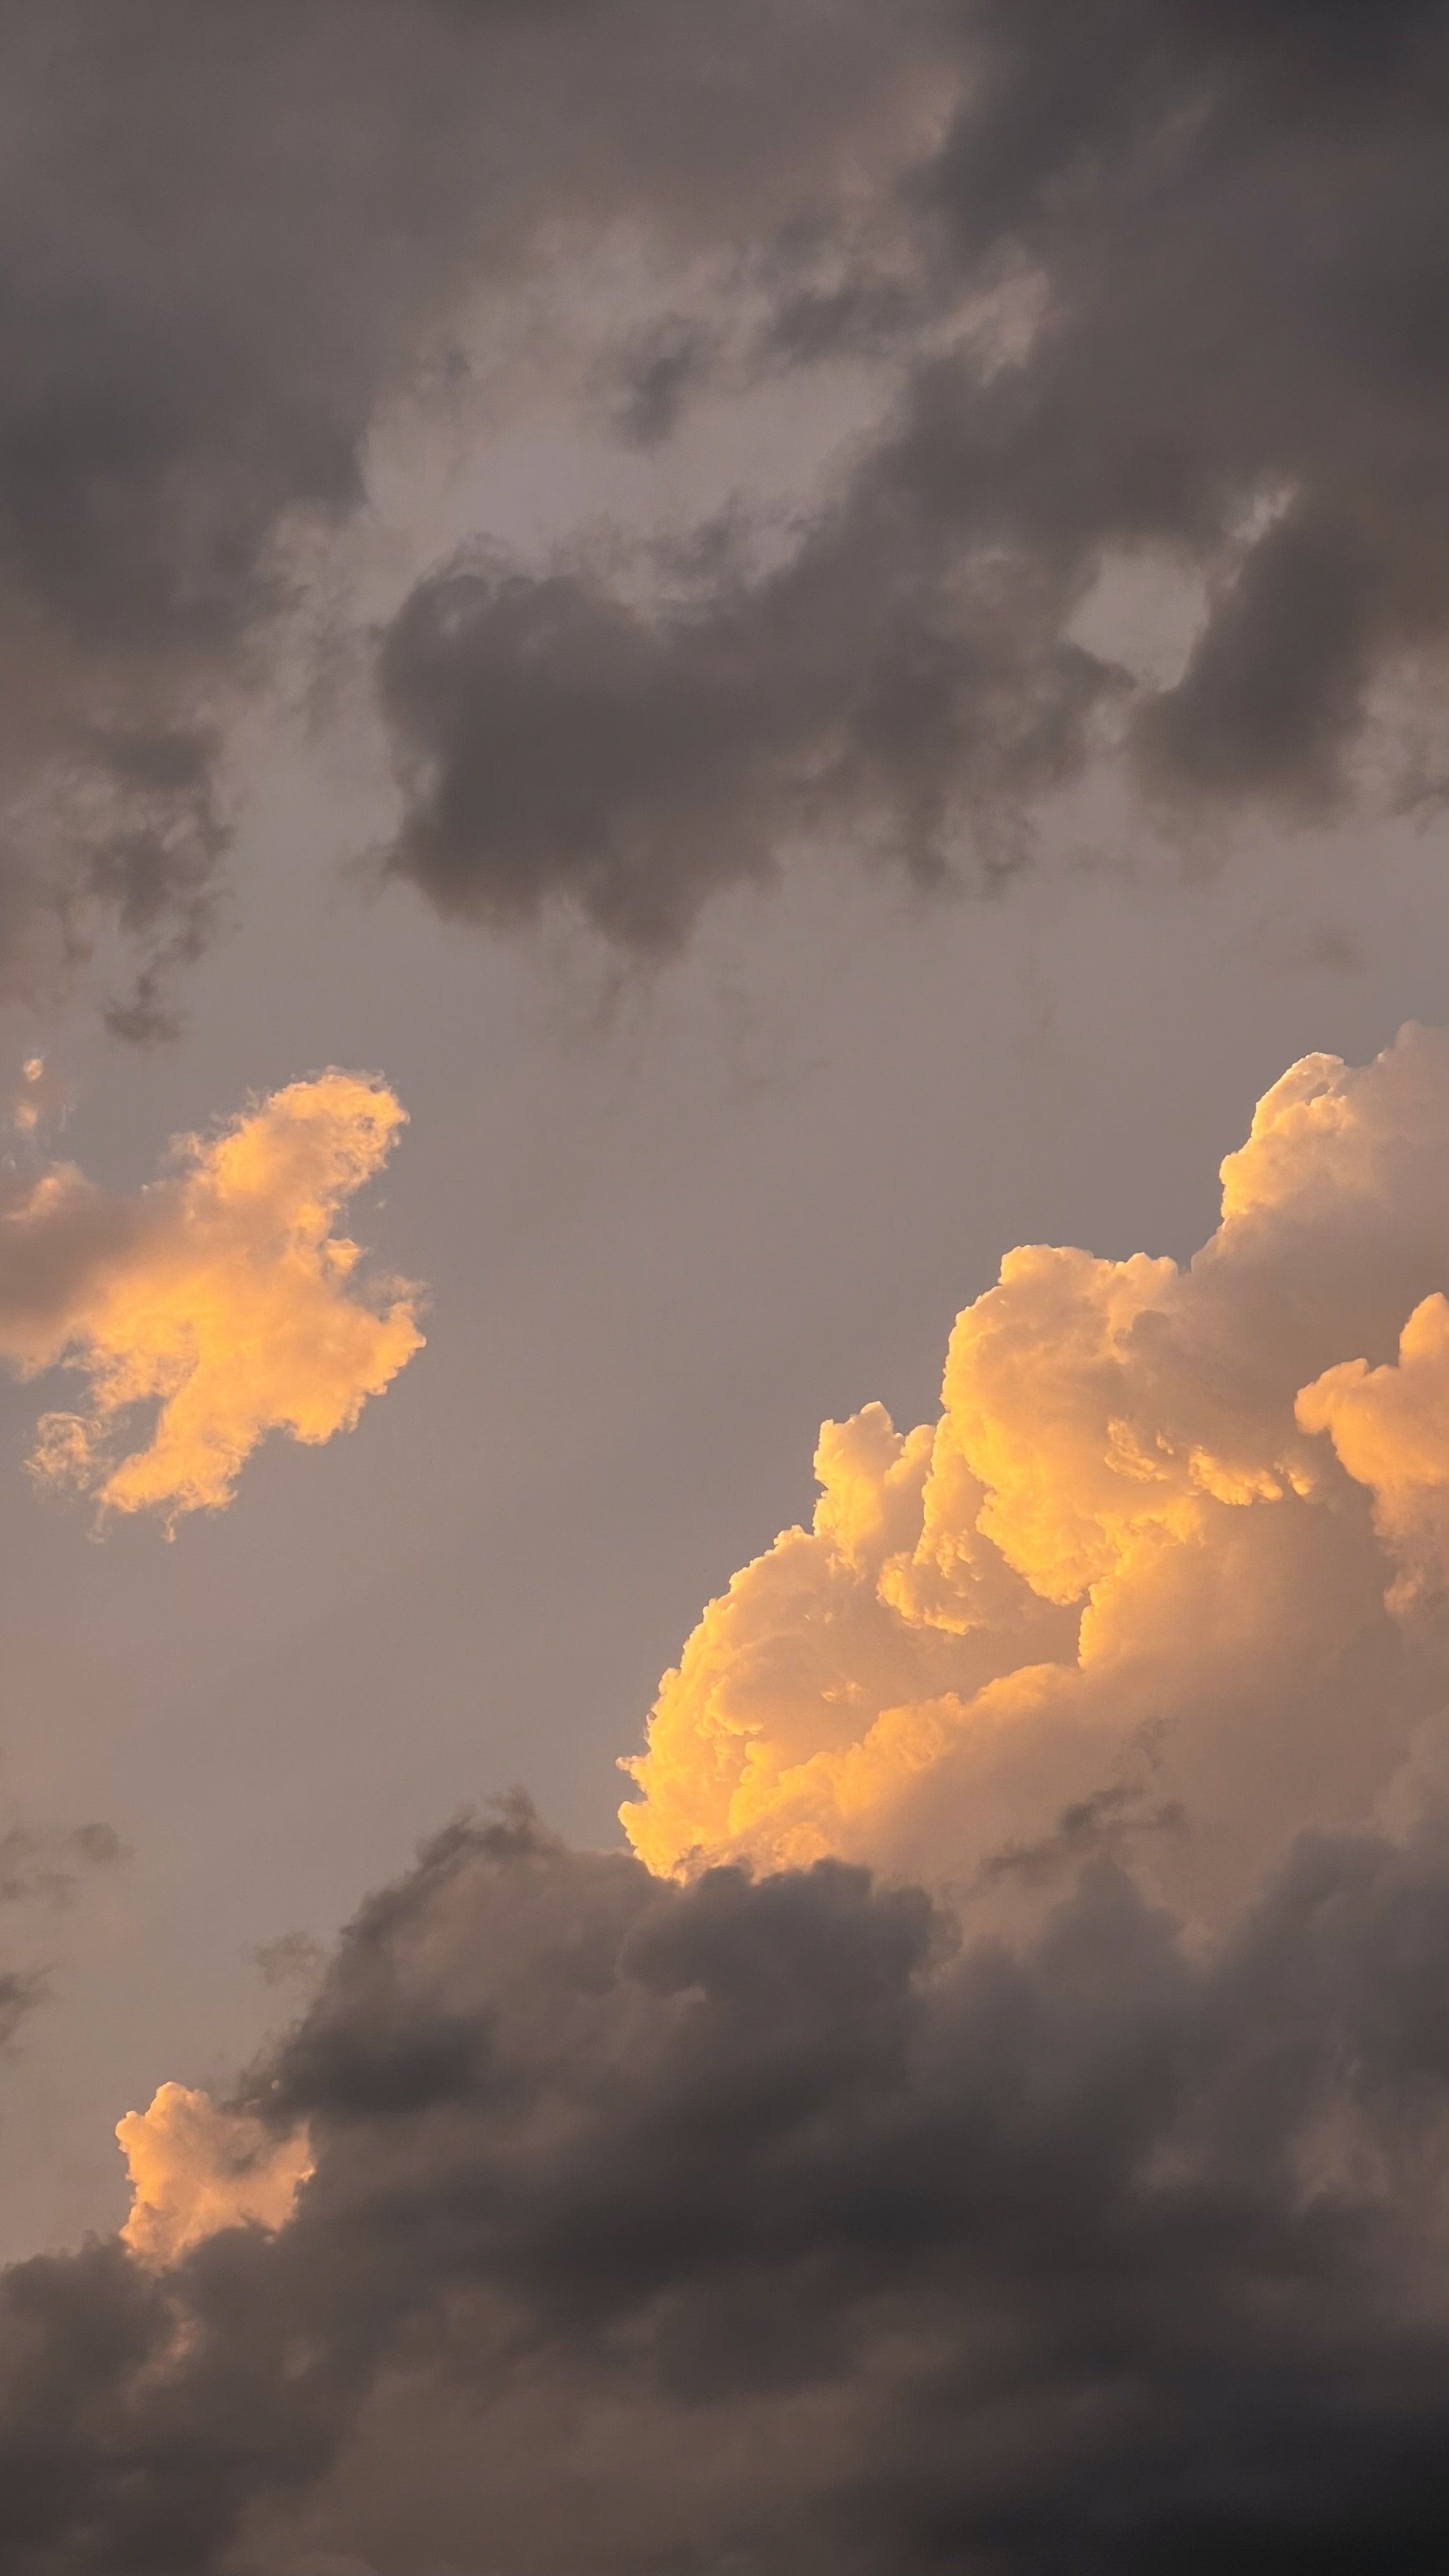 A plane flying through the clouds at sunset - Light yellow